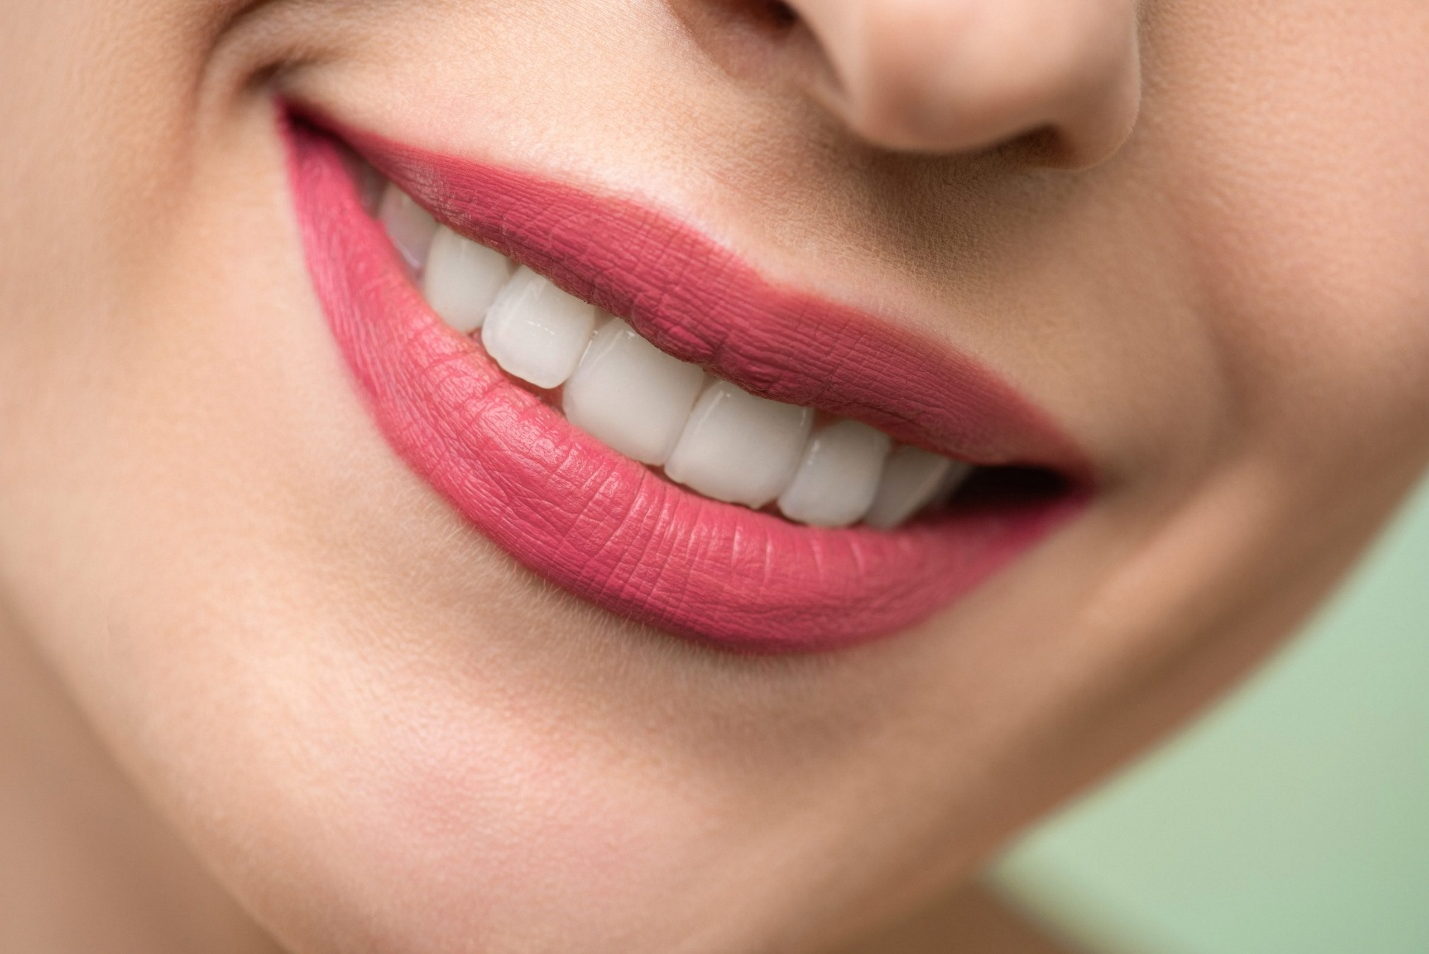 teeth whitening in Vancouver